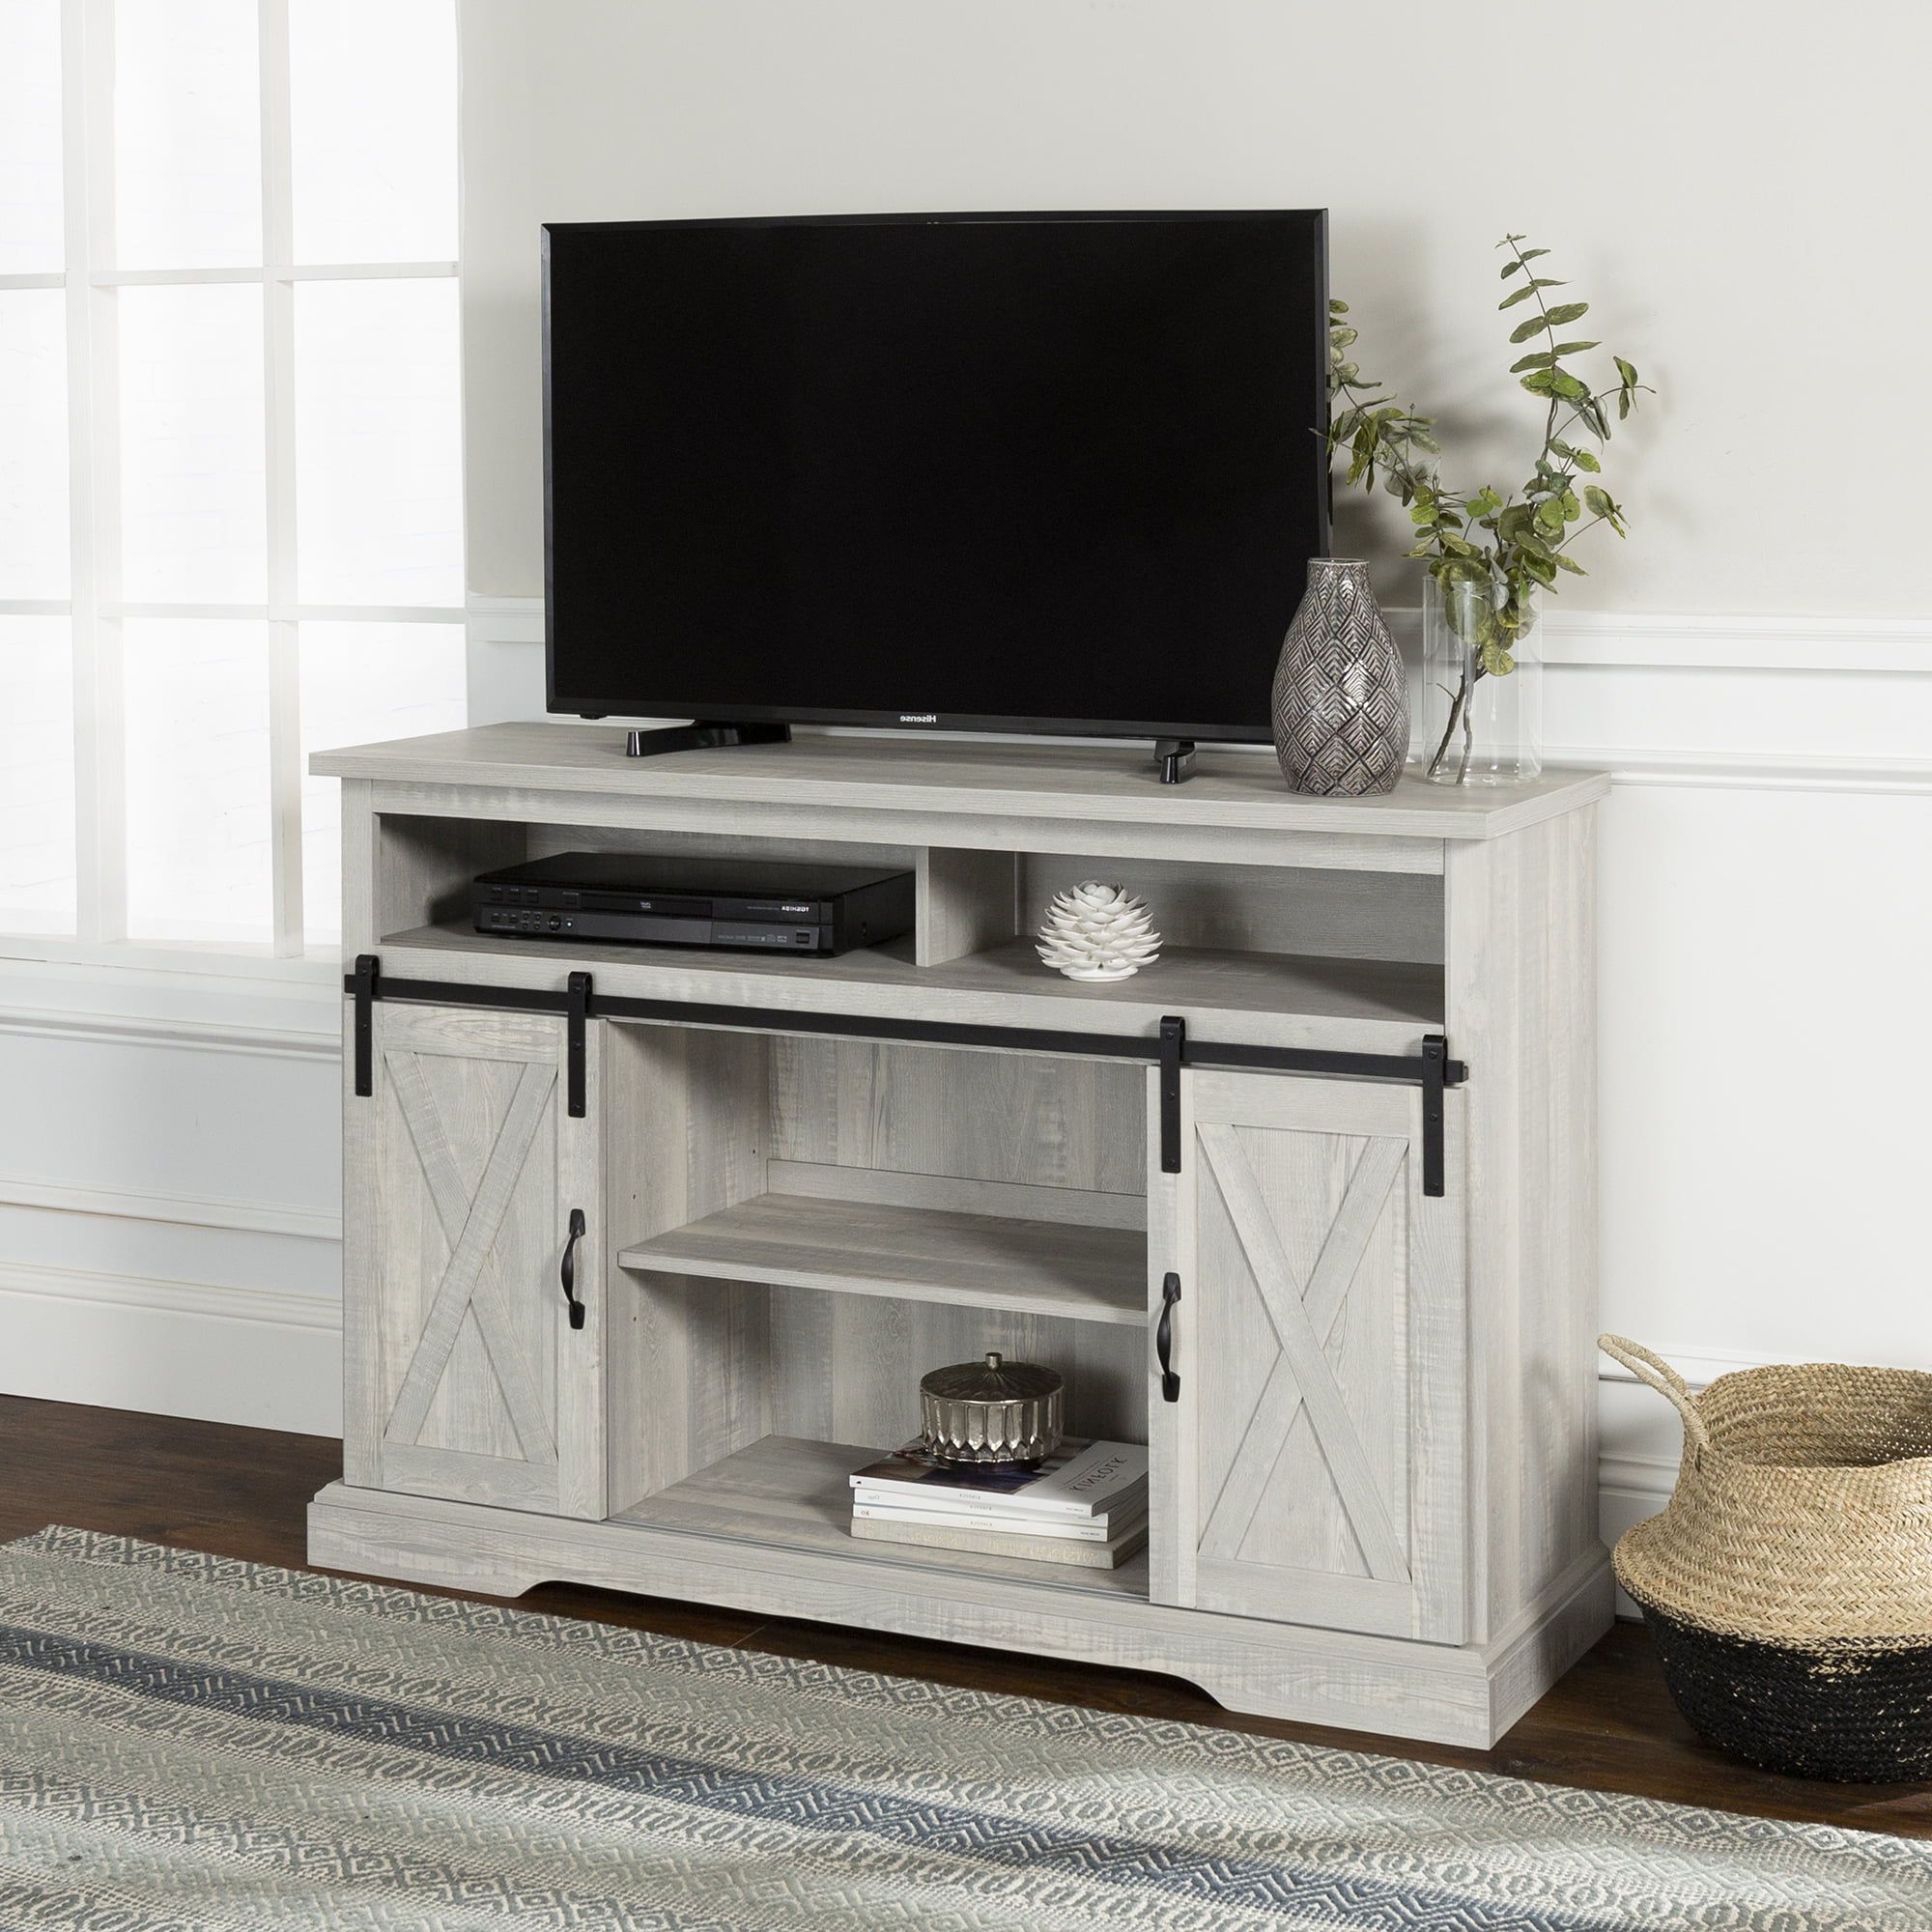 Farmhouse Tv Stands Pertaining To Best And Newest Manor Park Farmhouse Barn Door Tv Stand For Tvs Up To 58", Stone Grey (View 11 of 15)